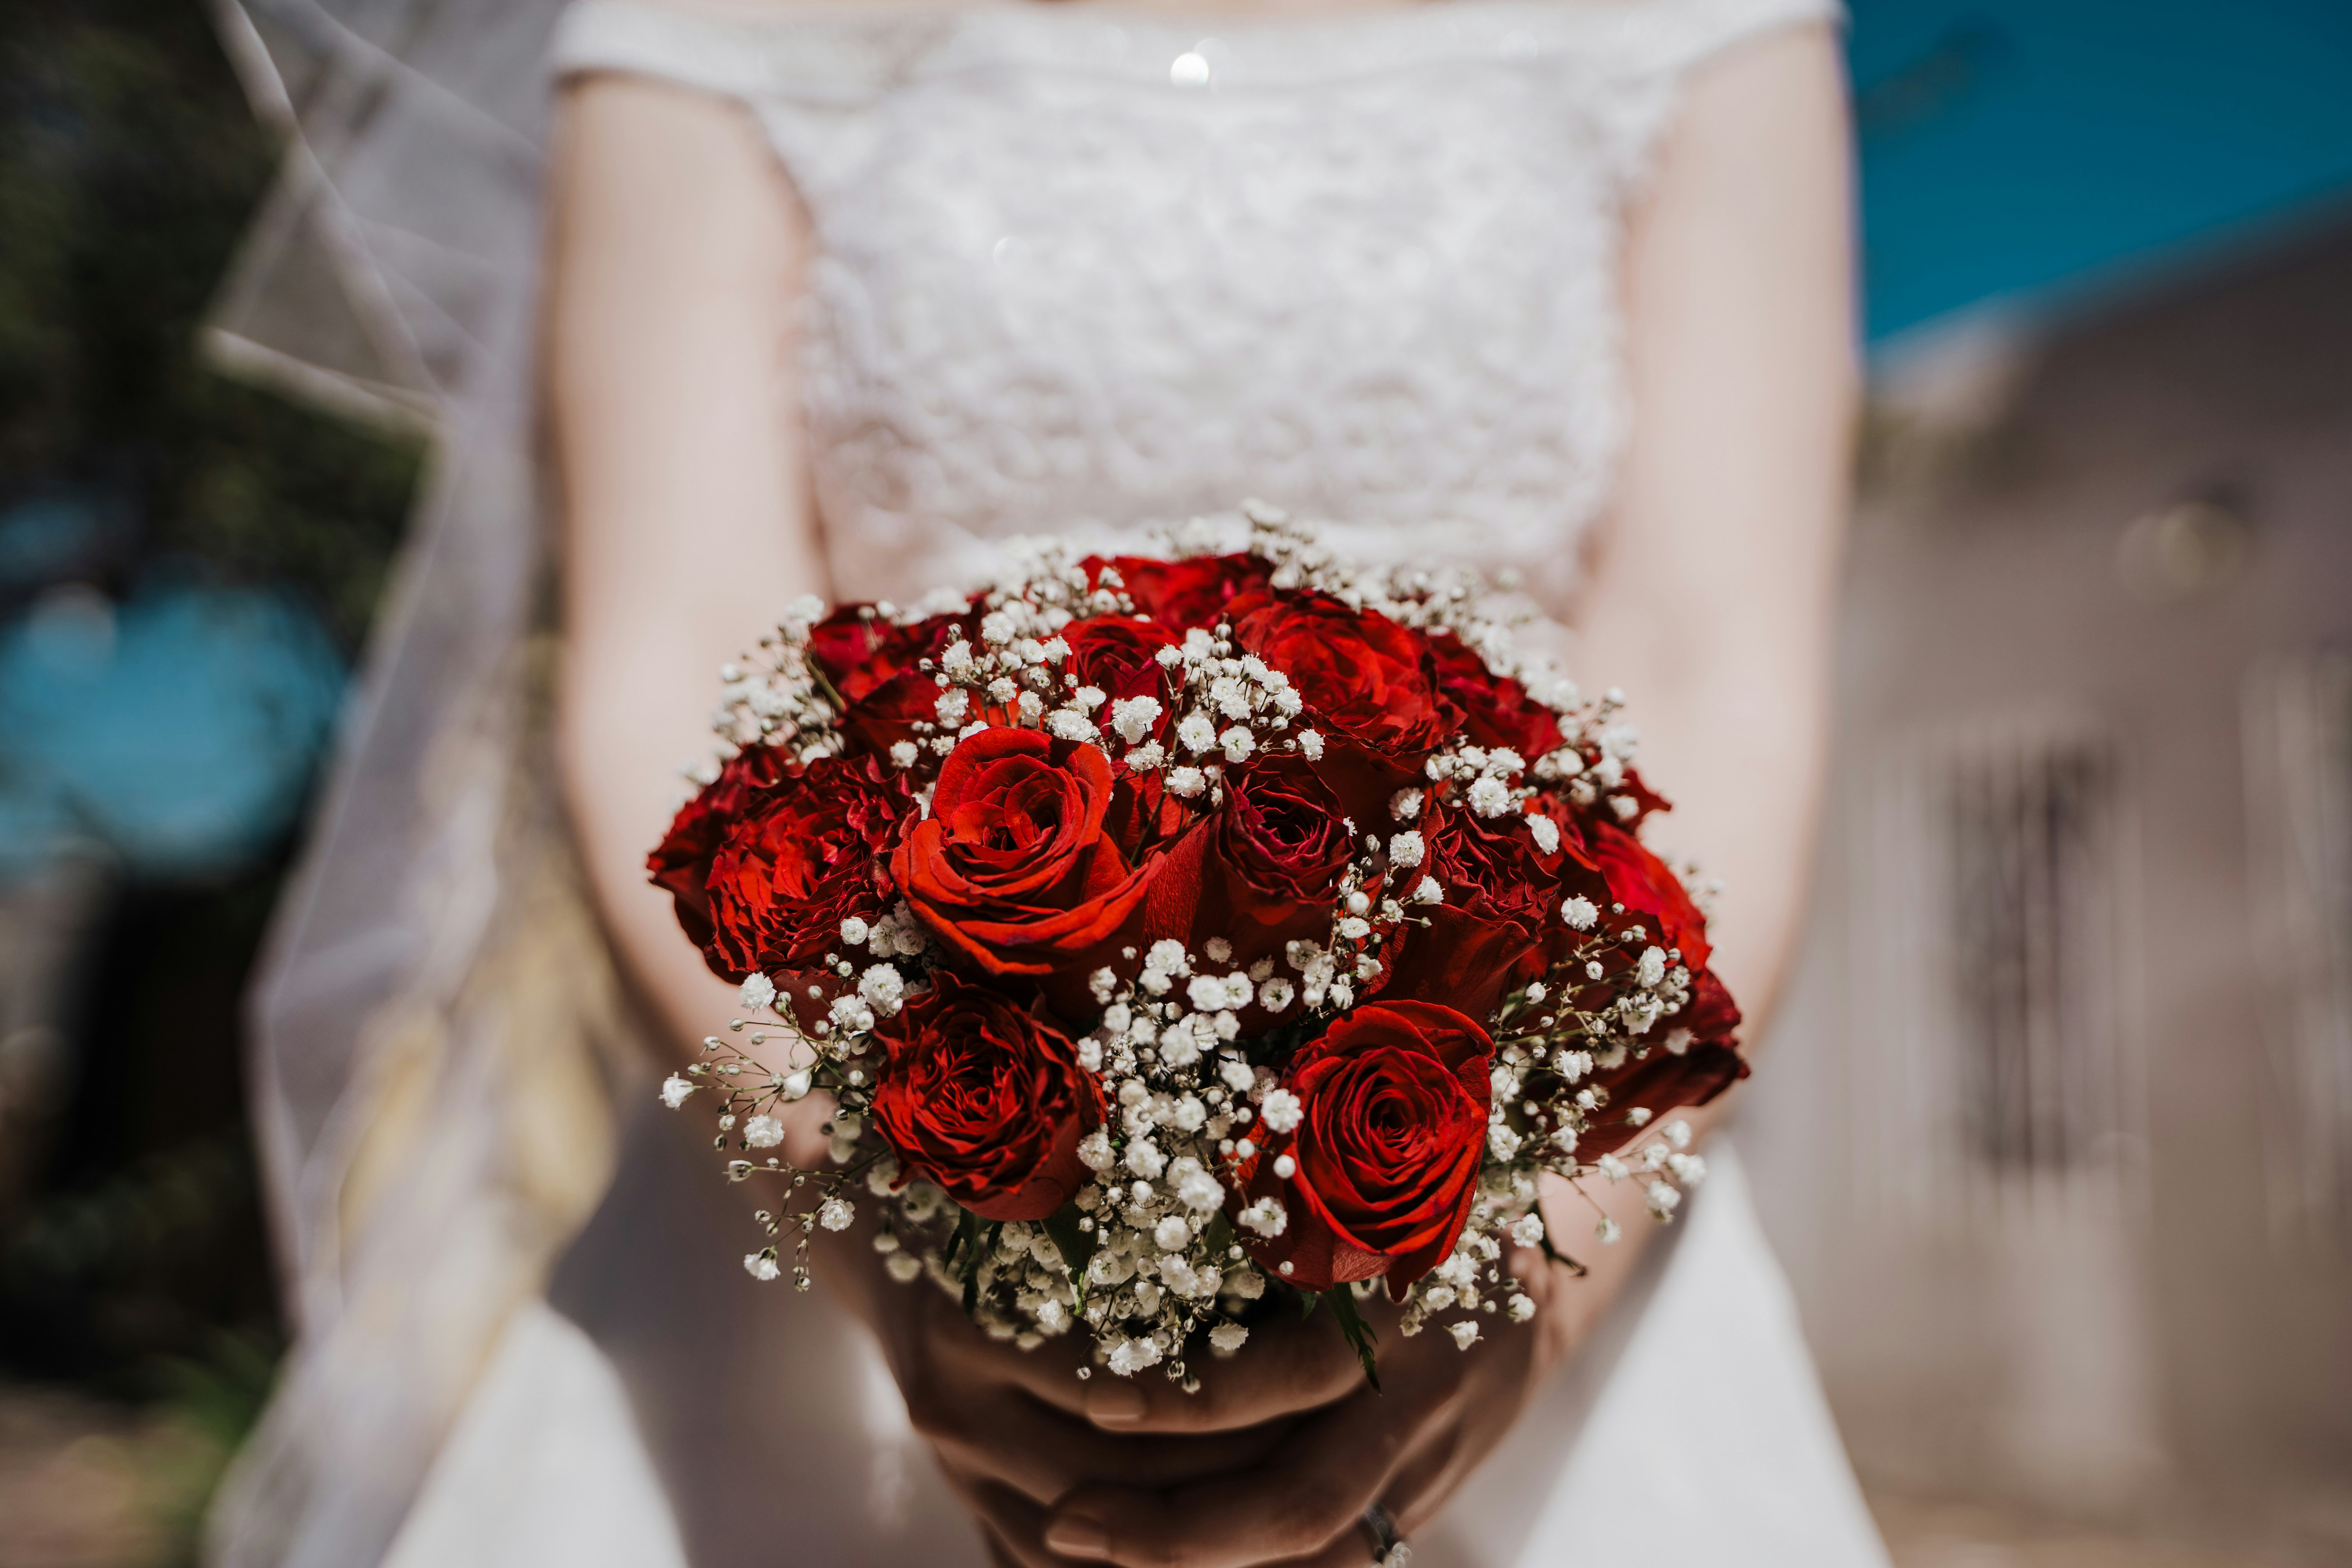 woman in white wedding dress holding bouquet of red roses